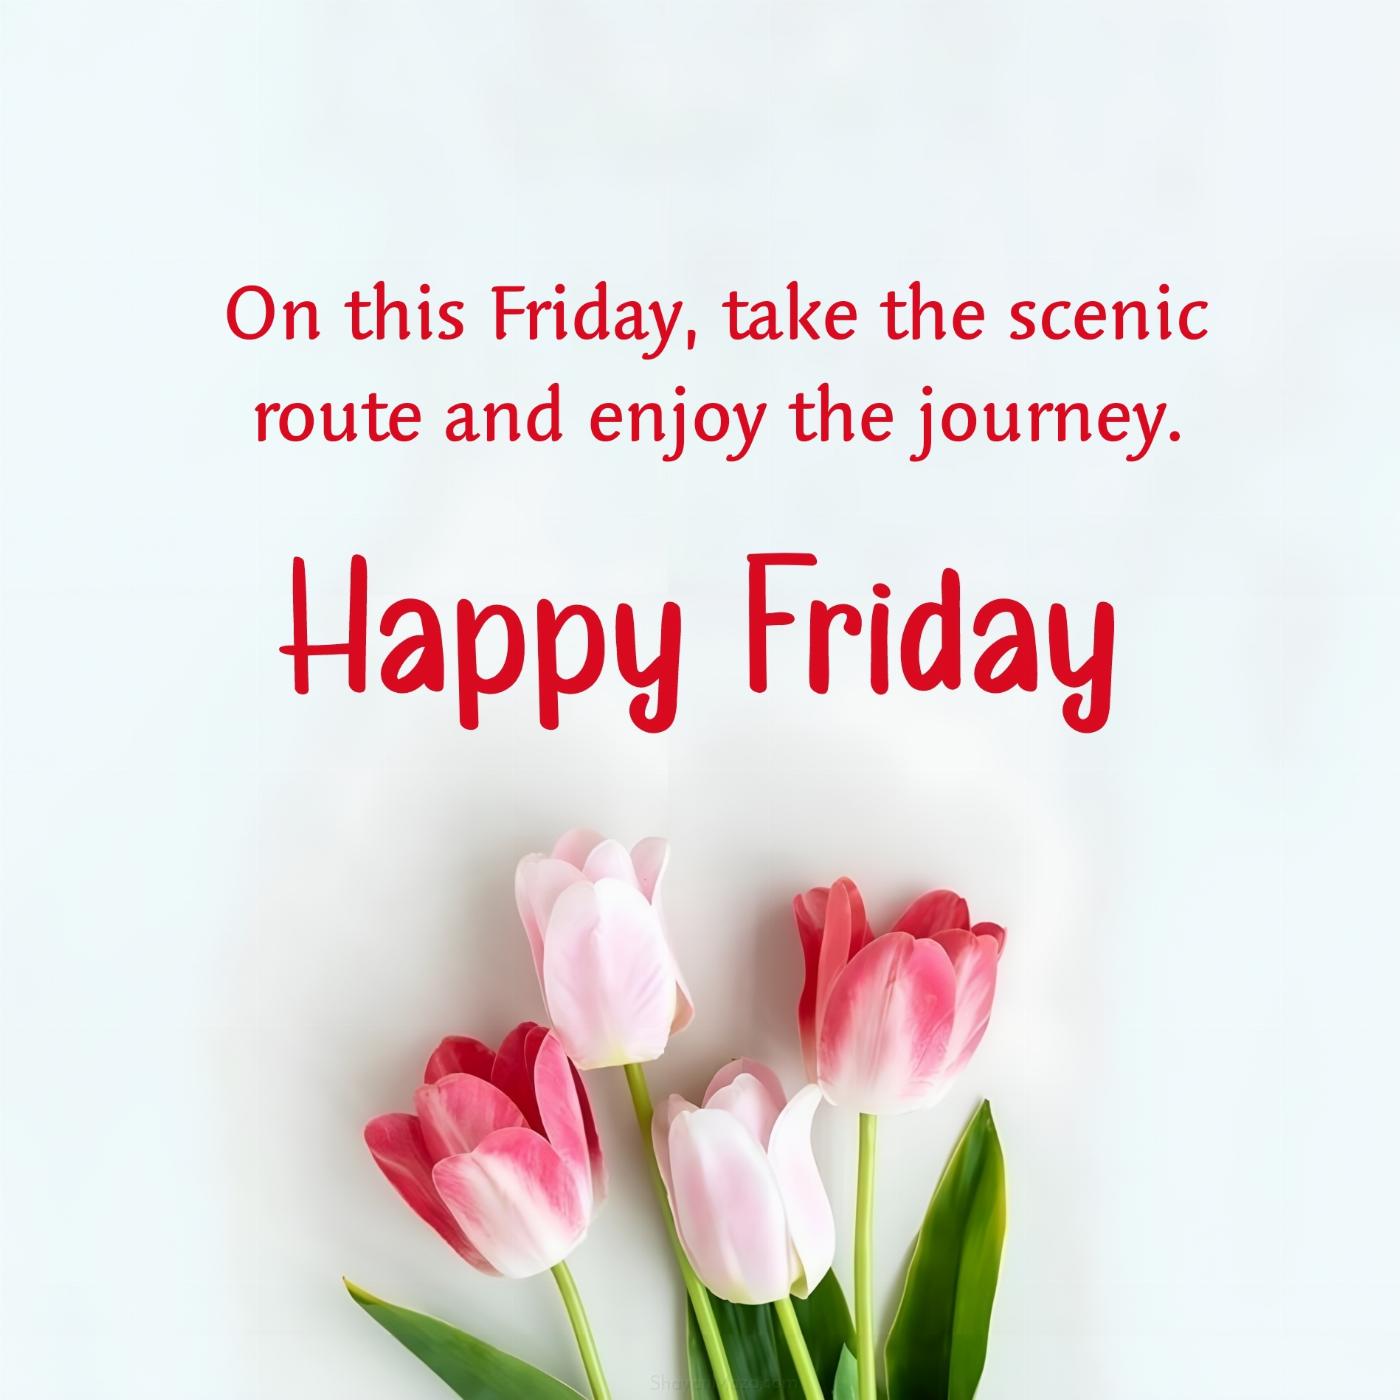 On this Friday take the scenic route and enjoy the journey